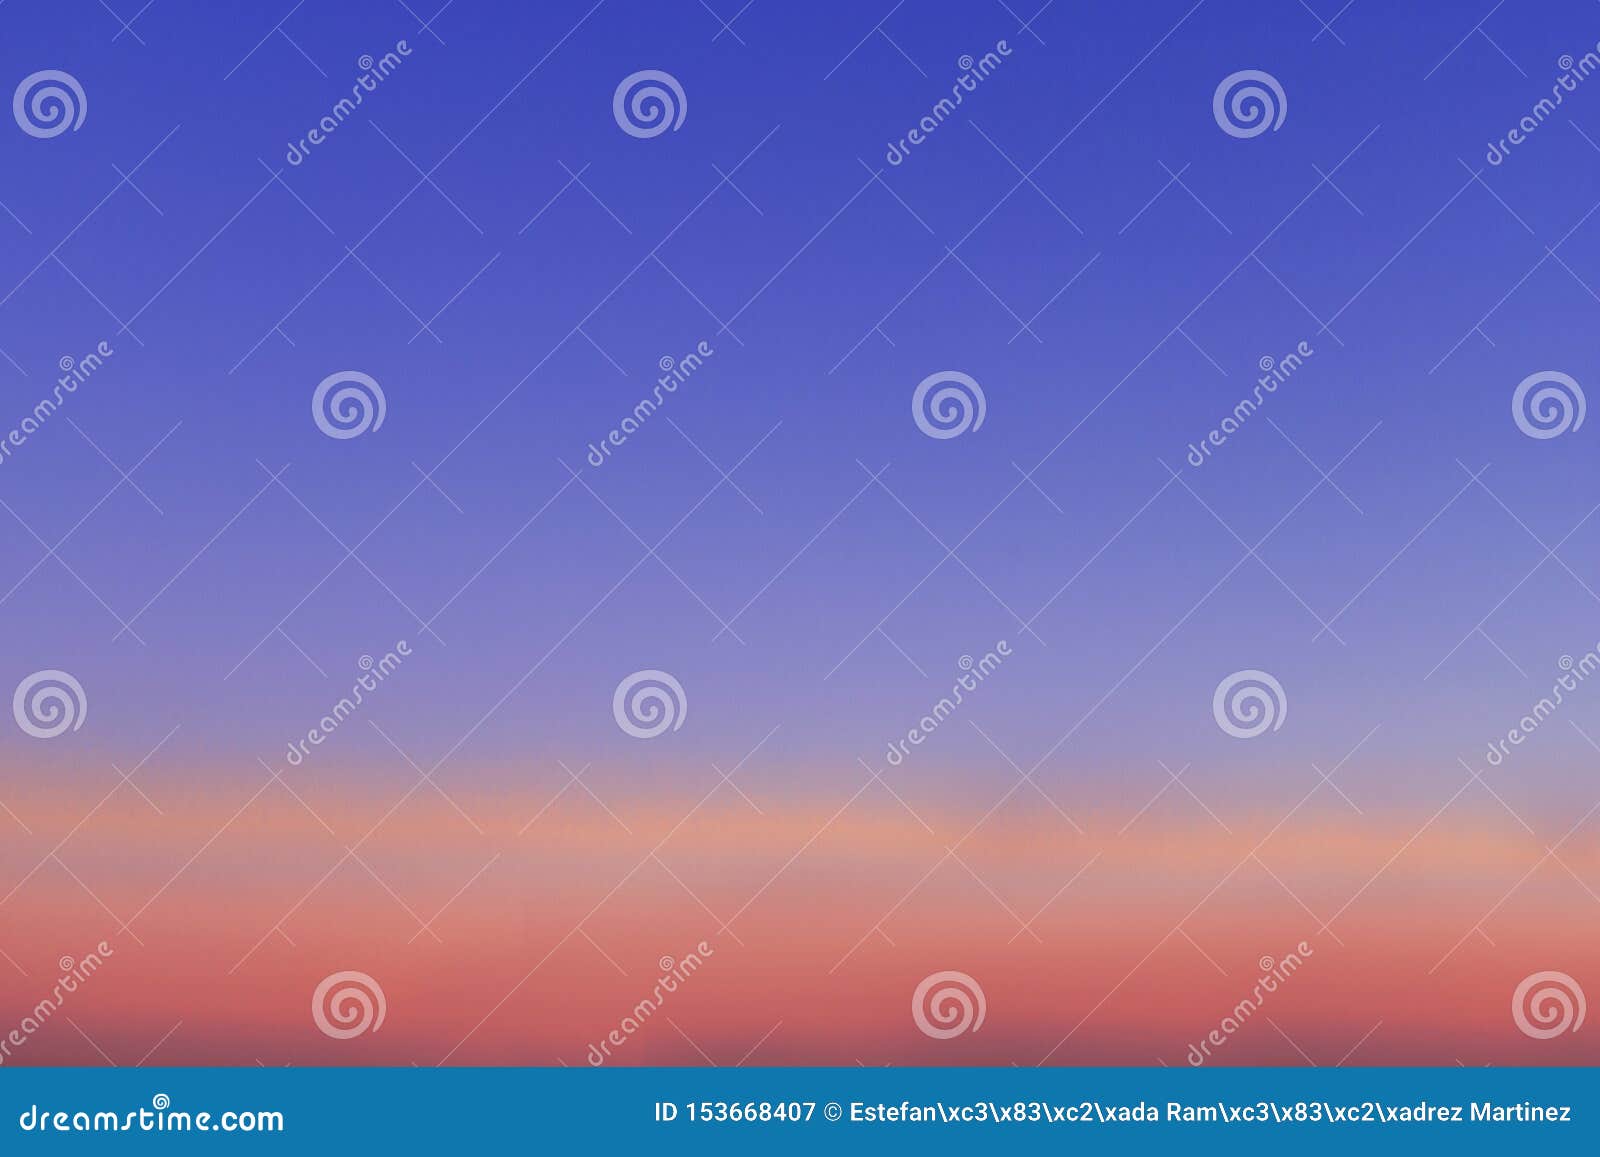 creative photography of sky gradient with  effect